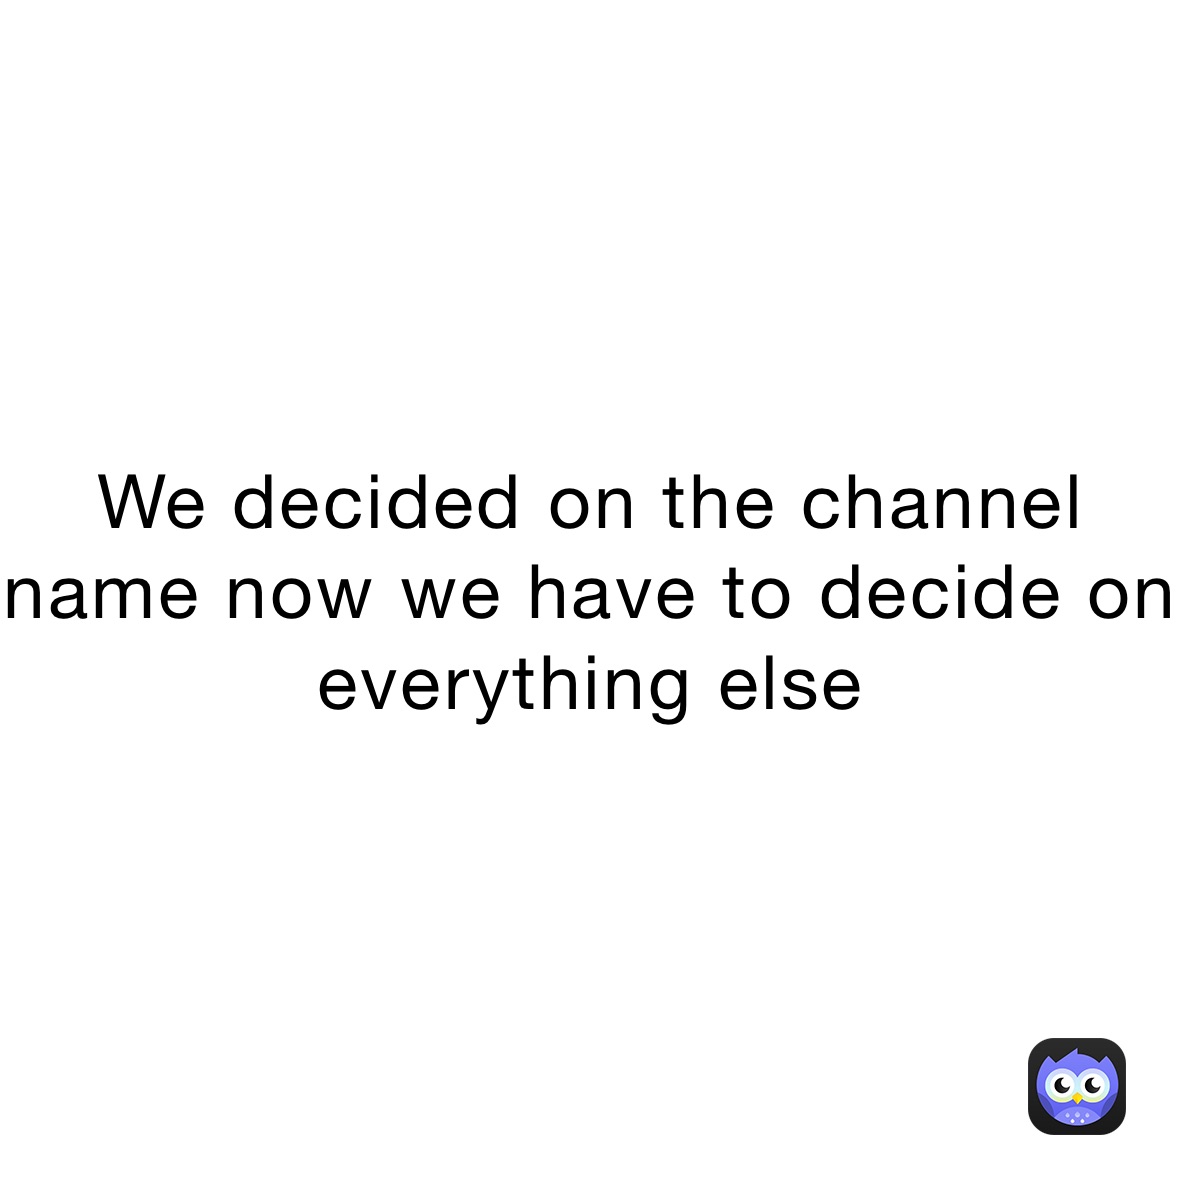 We decided on the channel name now we have to decide on everything else